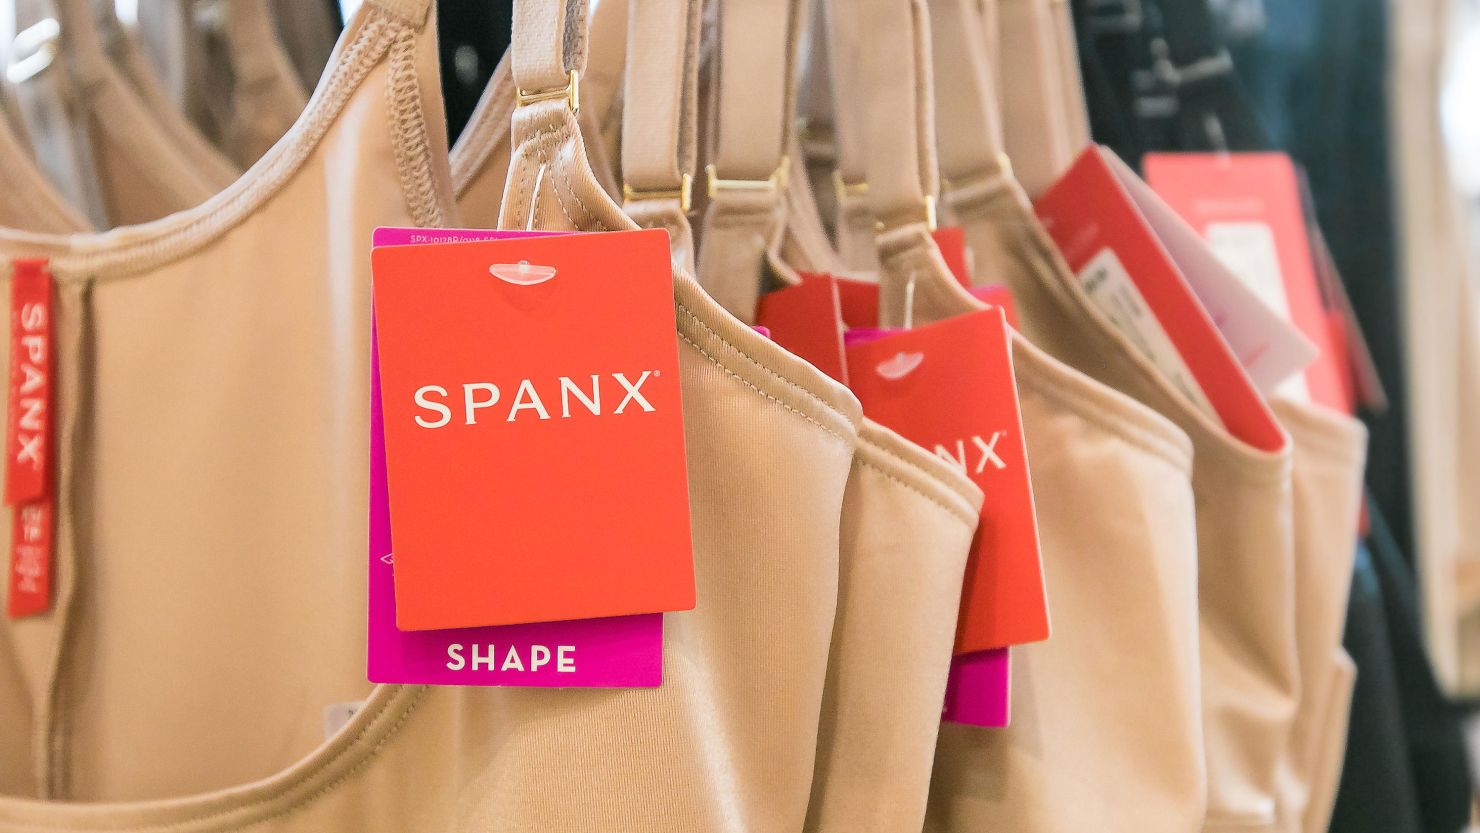 Spanx has new assets